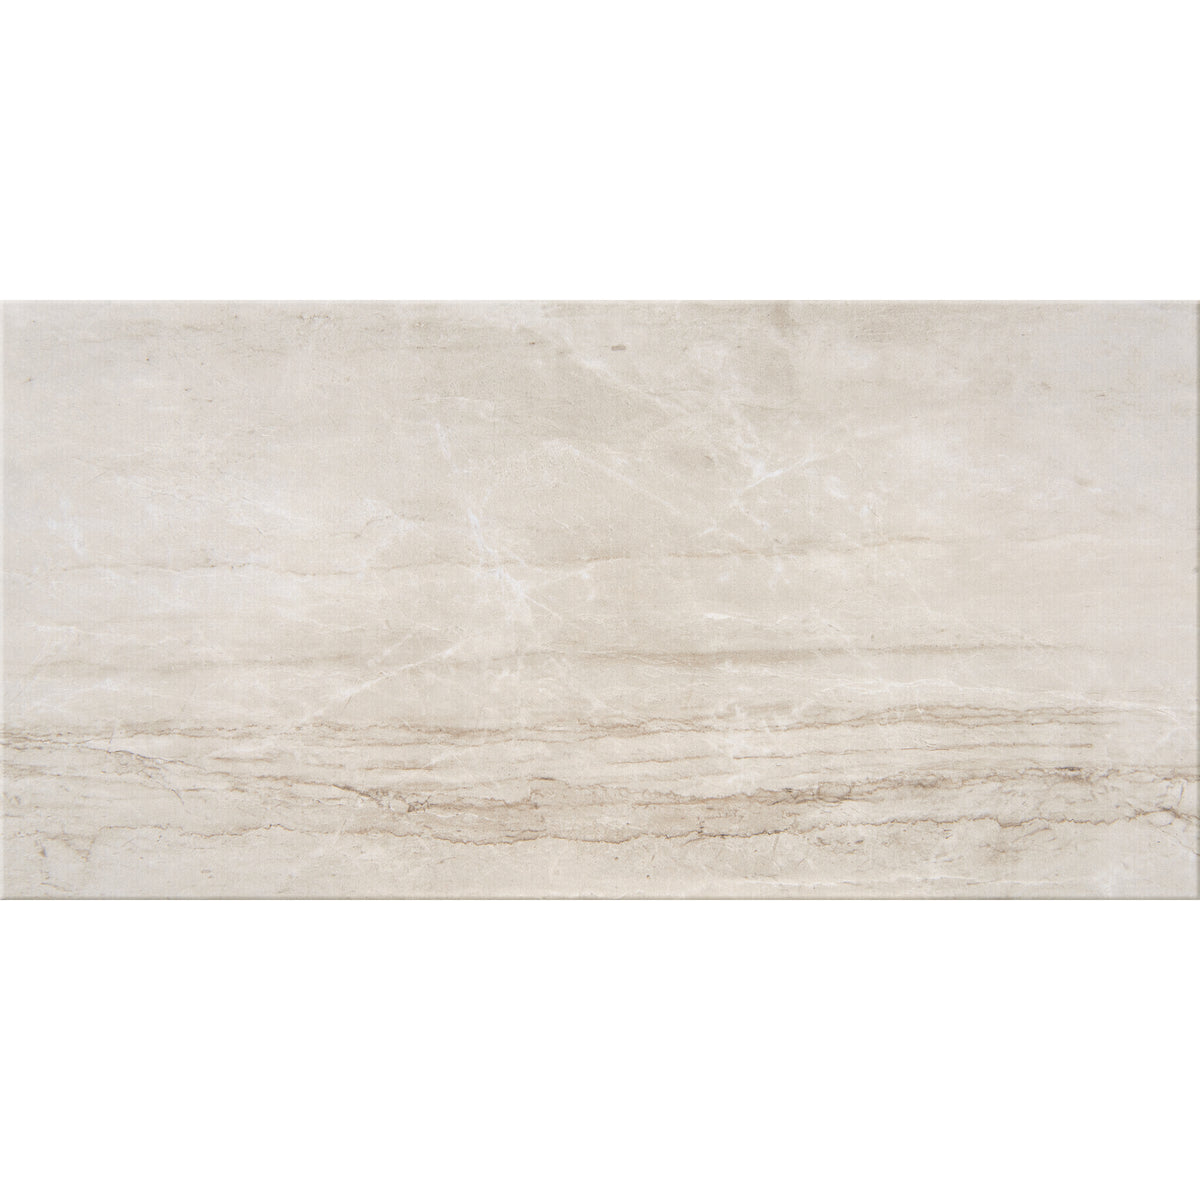 American Olean - Mythique Marble 12 in. x 24 in. Colorbody Porcelain Tile - Botticino Polished